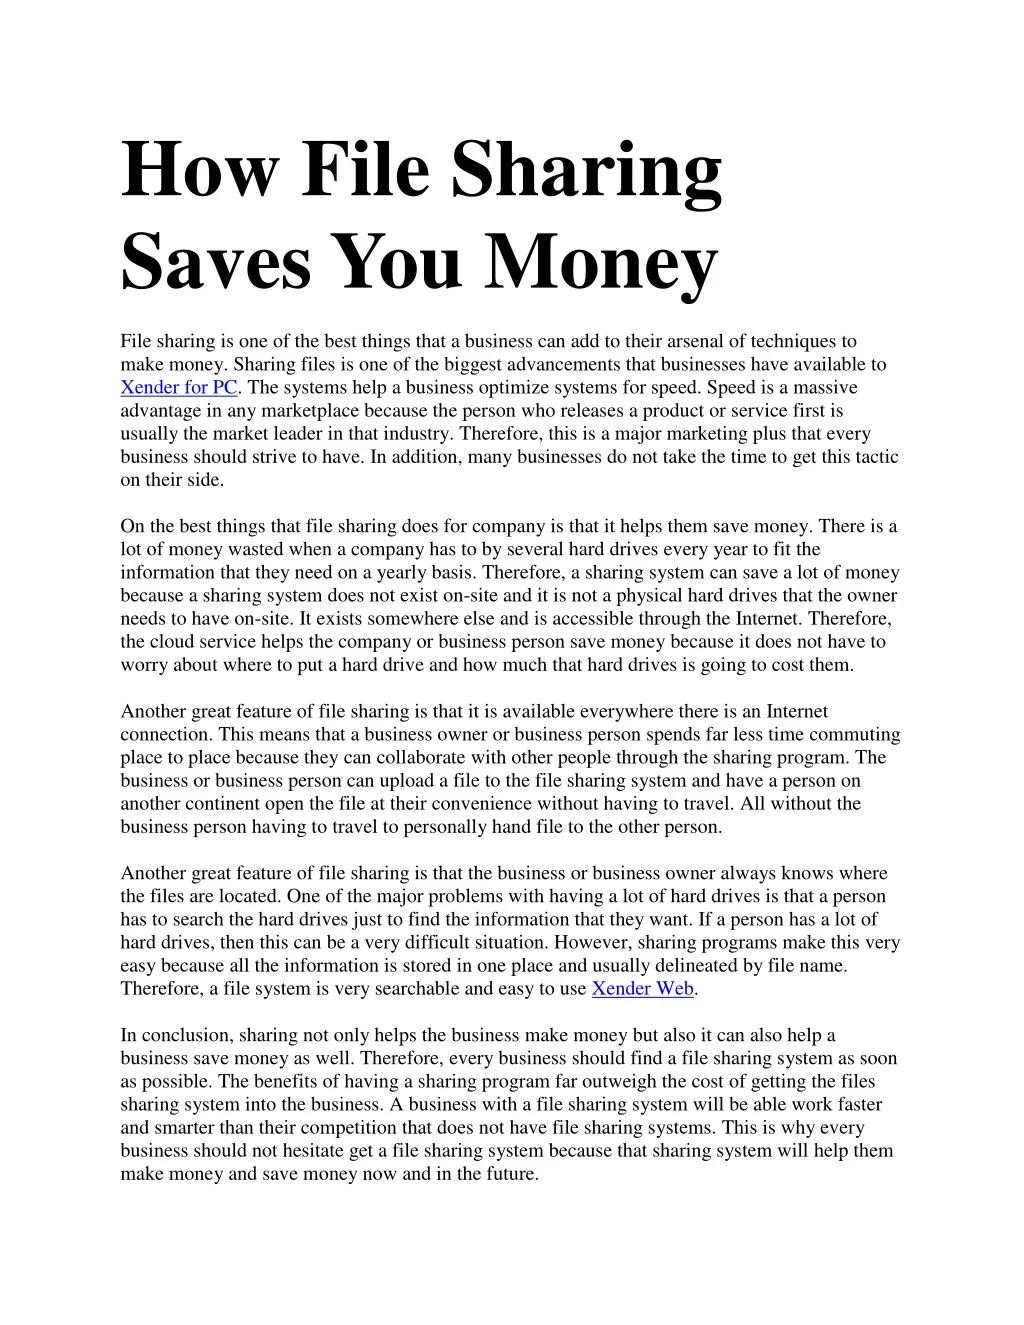 how file sharing saves you money